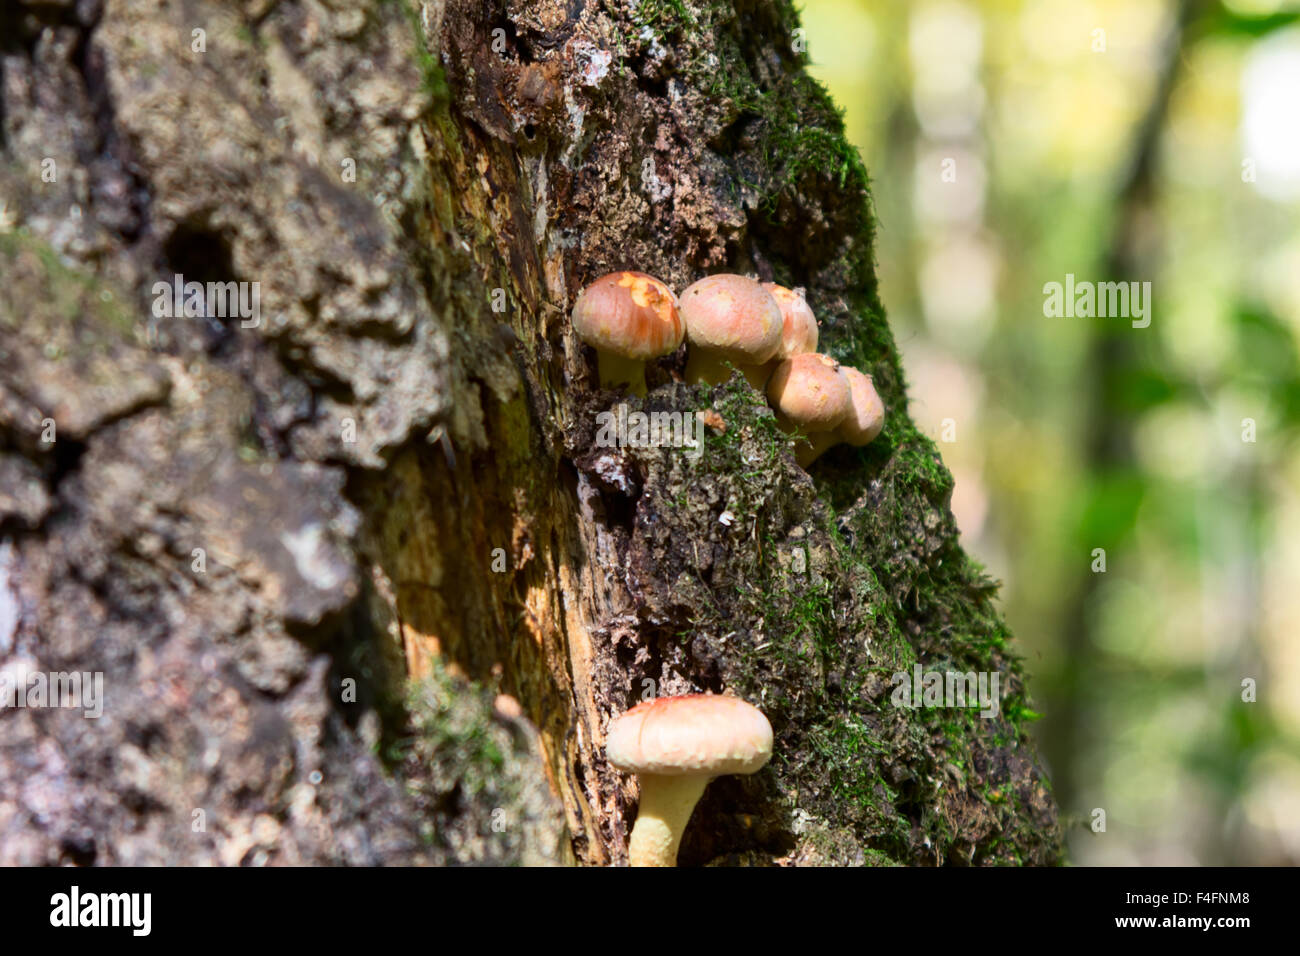 fungus Armillaria mellea in the forest Stock Photo